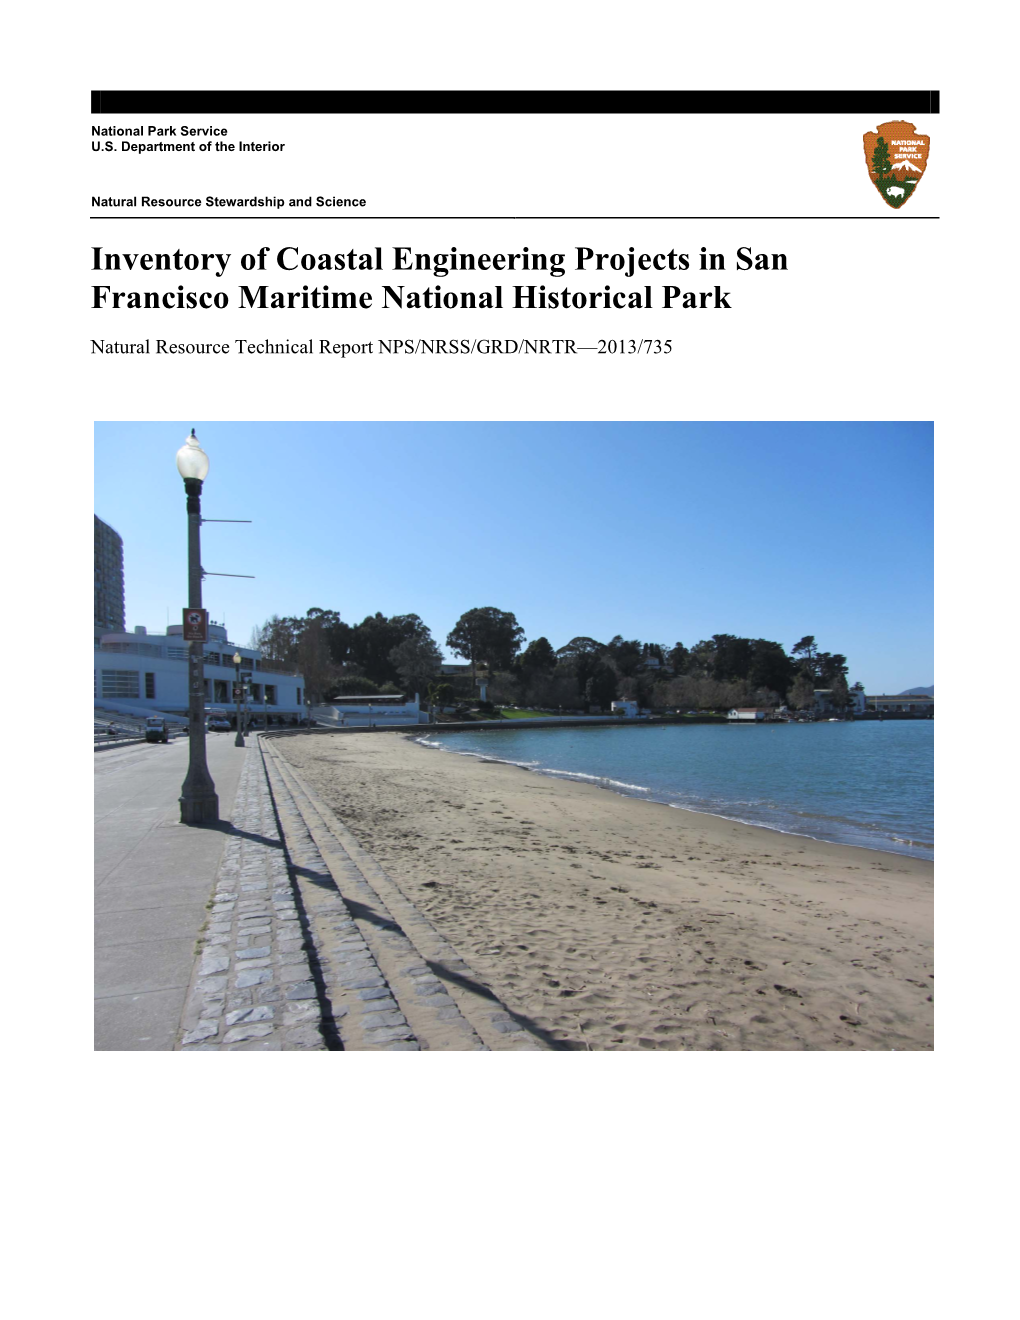 Inventory of Coastal Engineering Projects in San Francisco Maritime National Historical Park